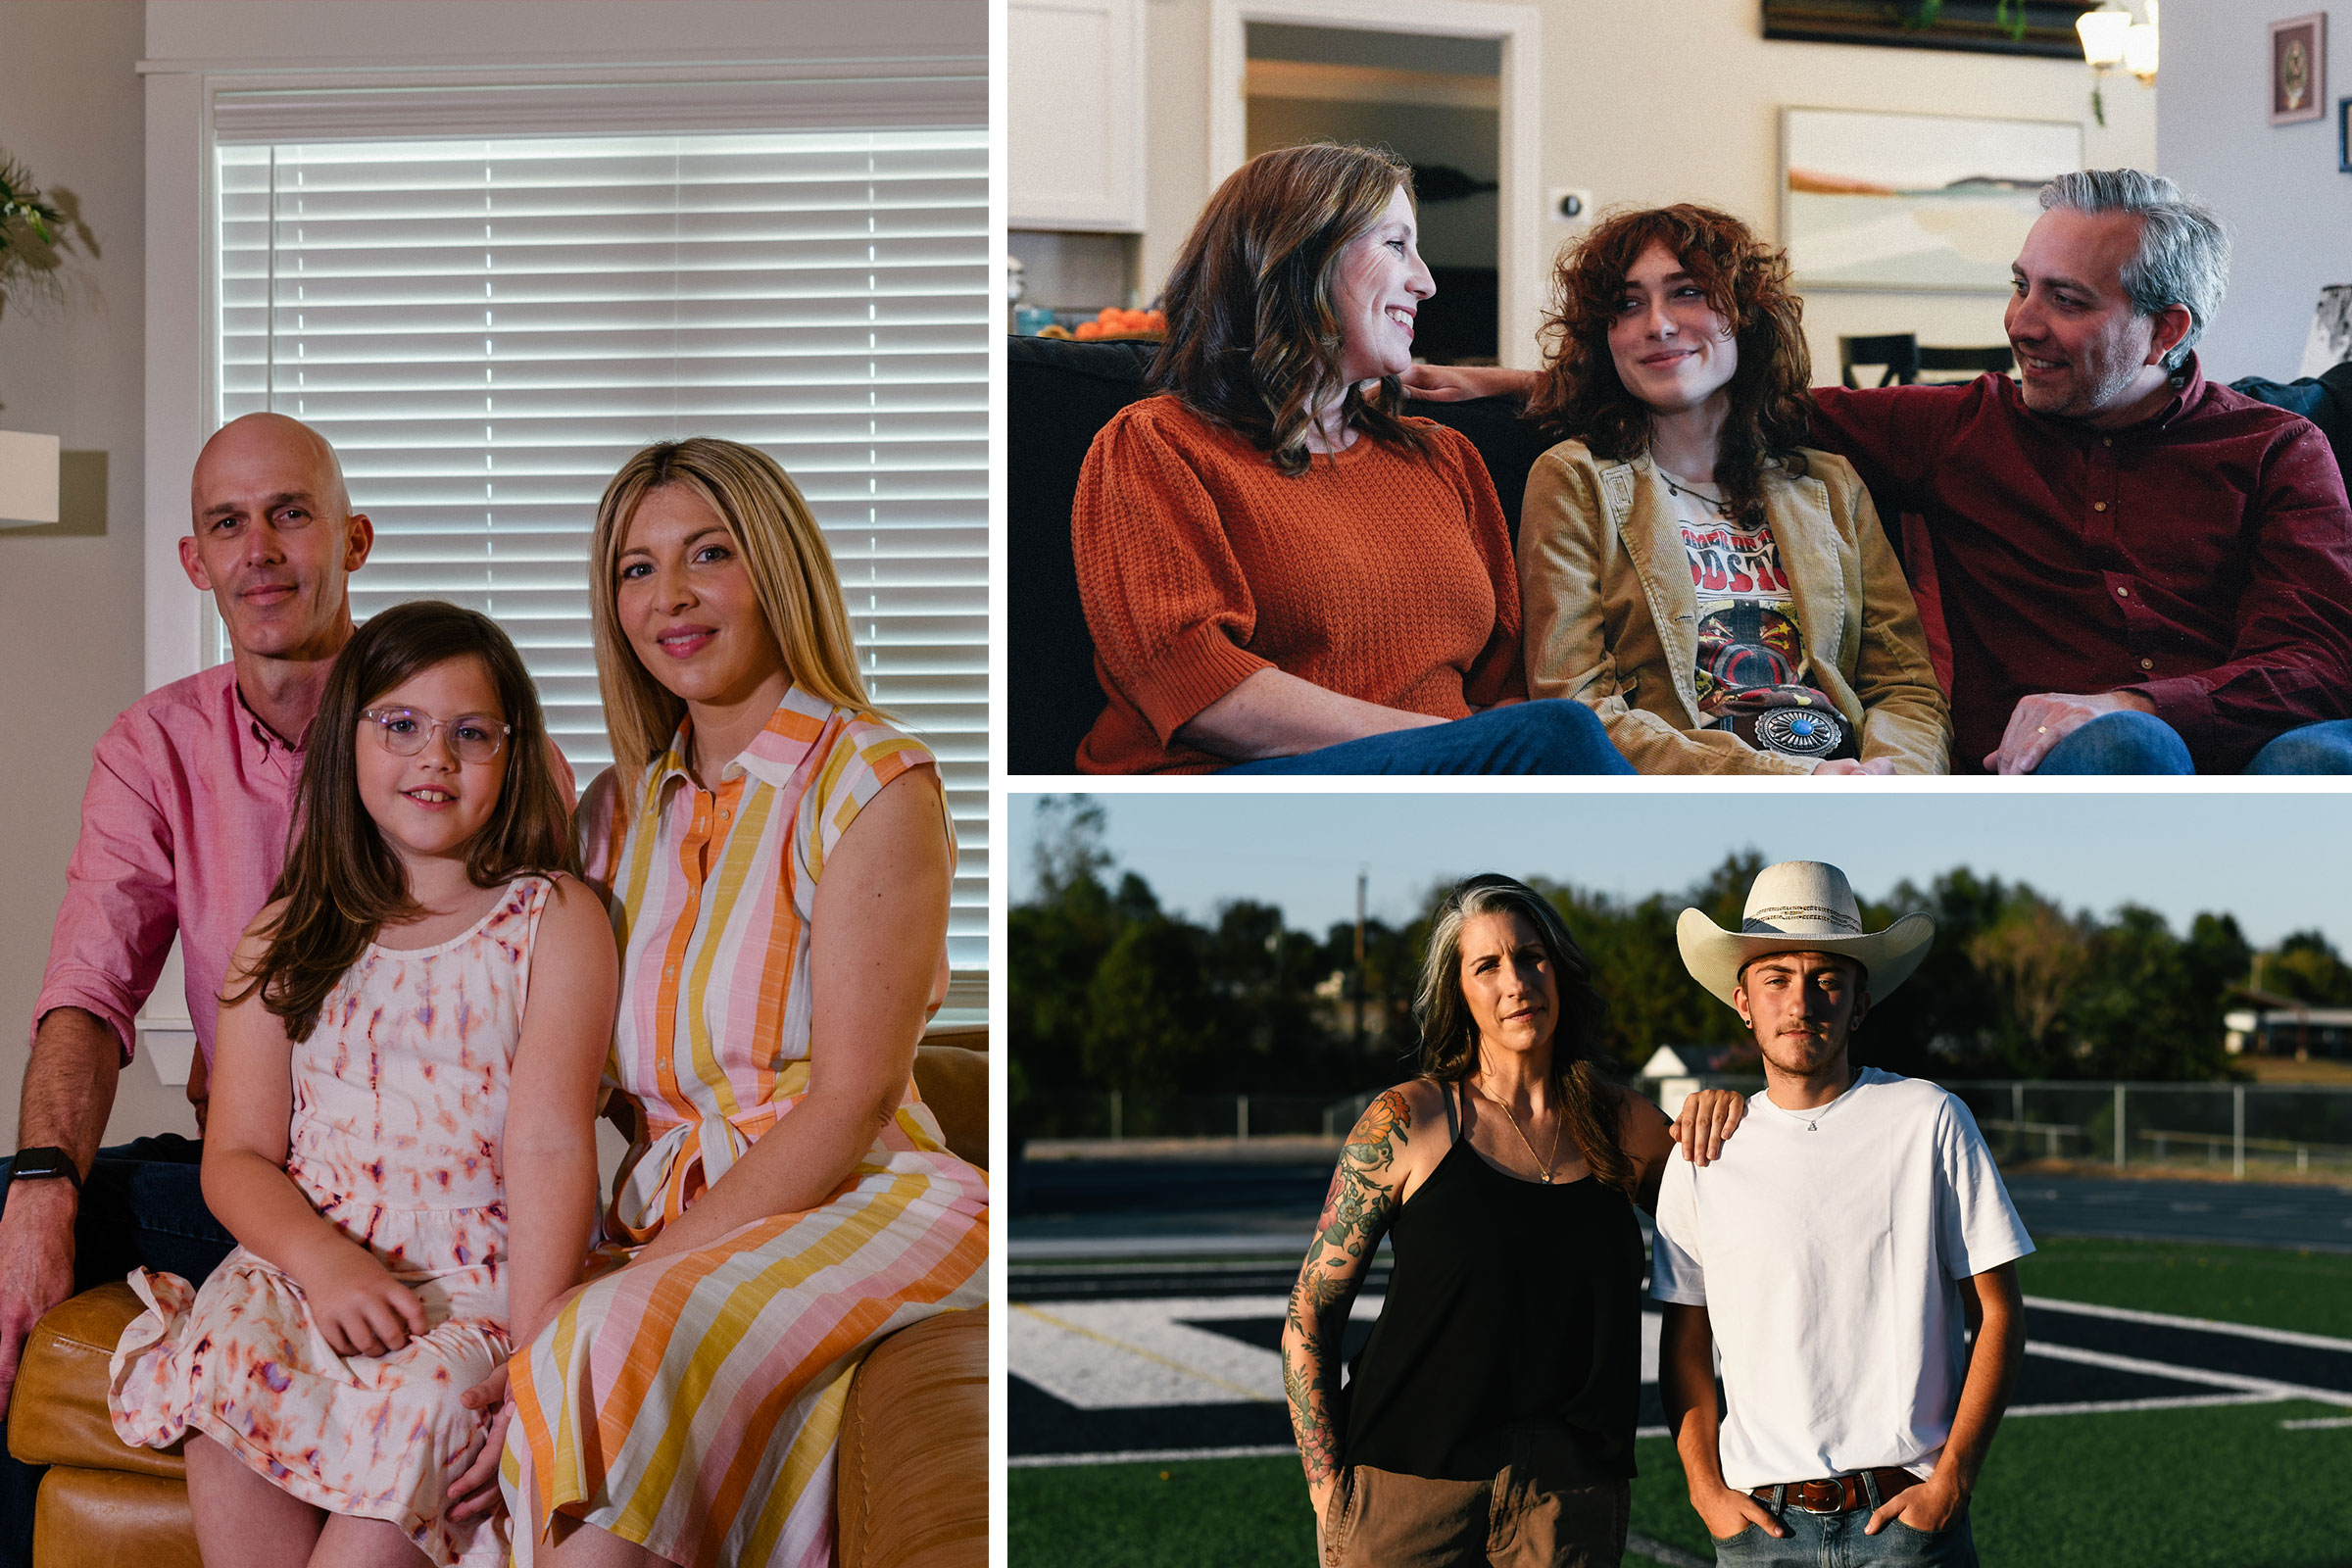 The Dennis family, Jennen family, and Brandt family are among the families of transgender youth who have challenged Arkansas’ ban on gender-affirming care for young people. The trial begins Oct. 17. (Rana Young/ACLU)